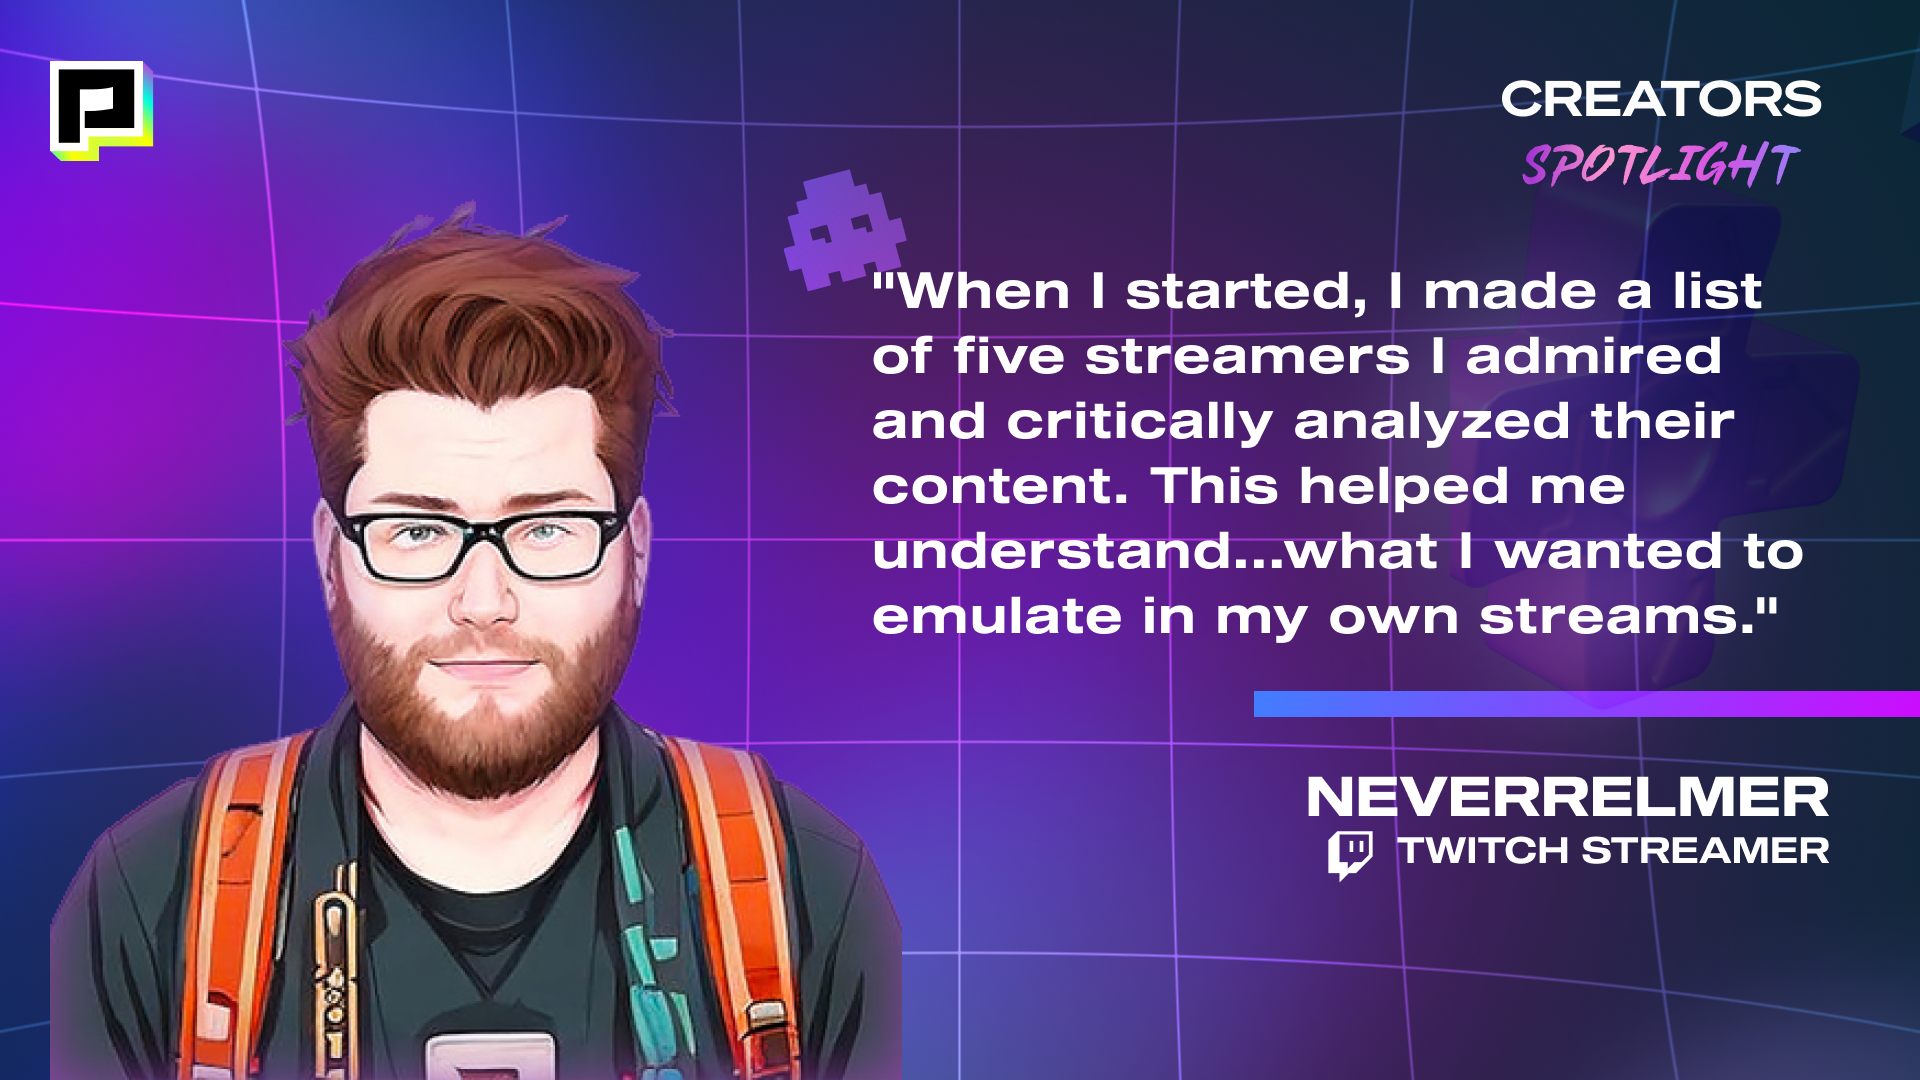 Image of Twitch Streamer, NEVERRELMER with his quote, "When I started, I made a list of five streamers I admired and critically analyzed their content. This helped me understand...what i wanted to emulate in my own streams."